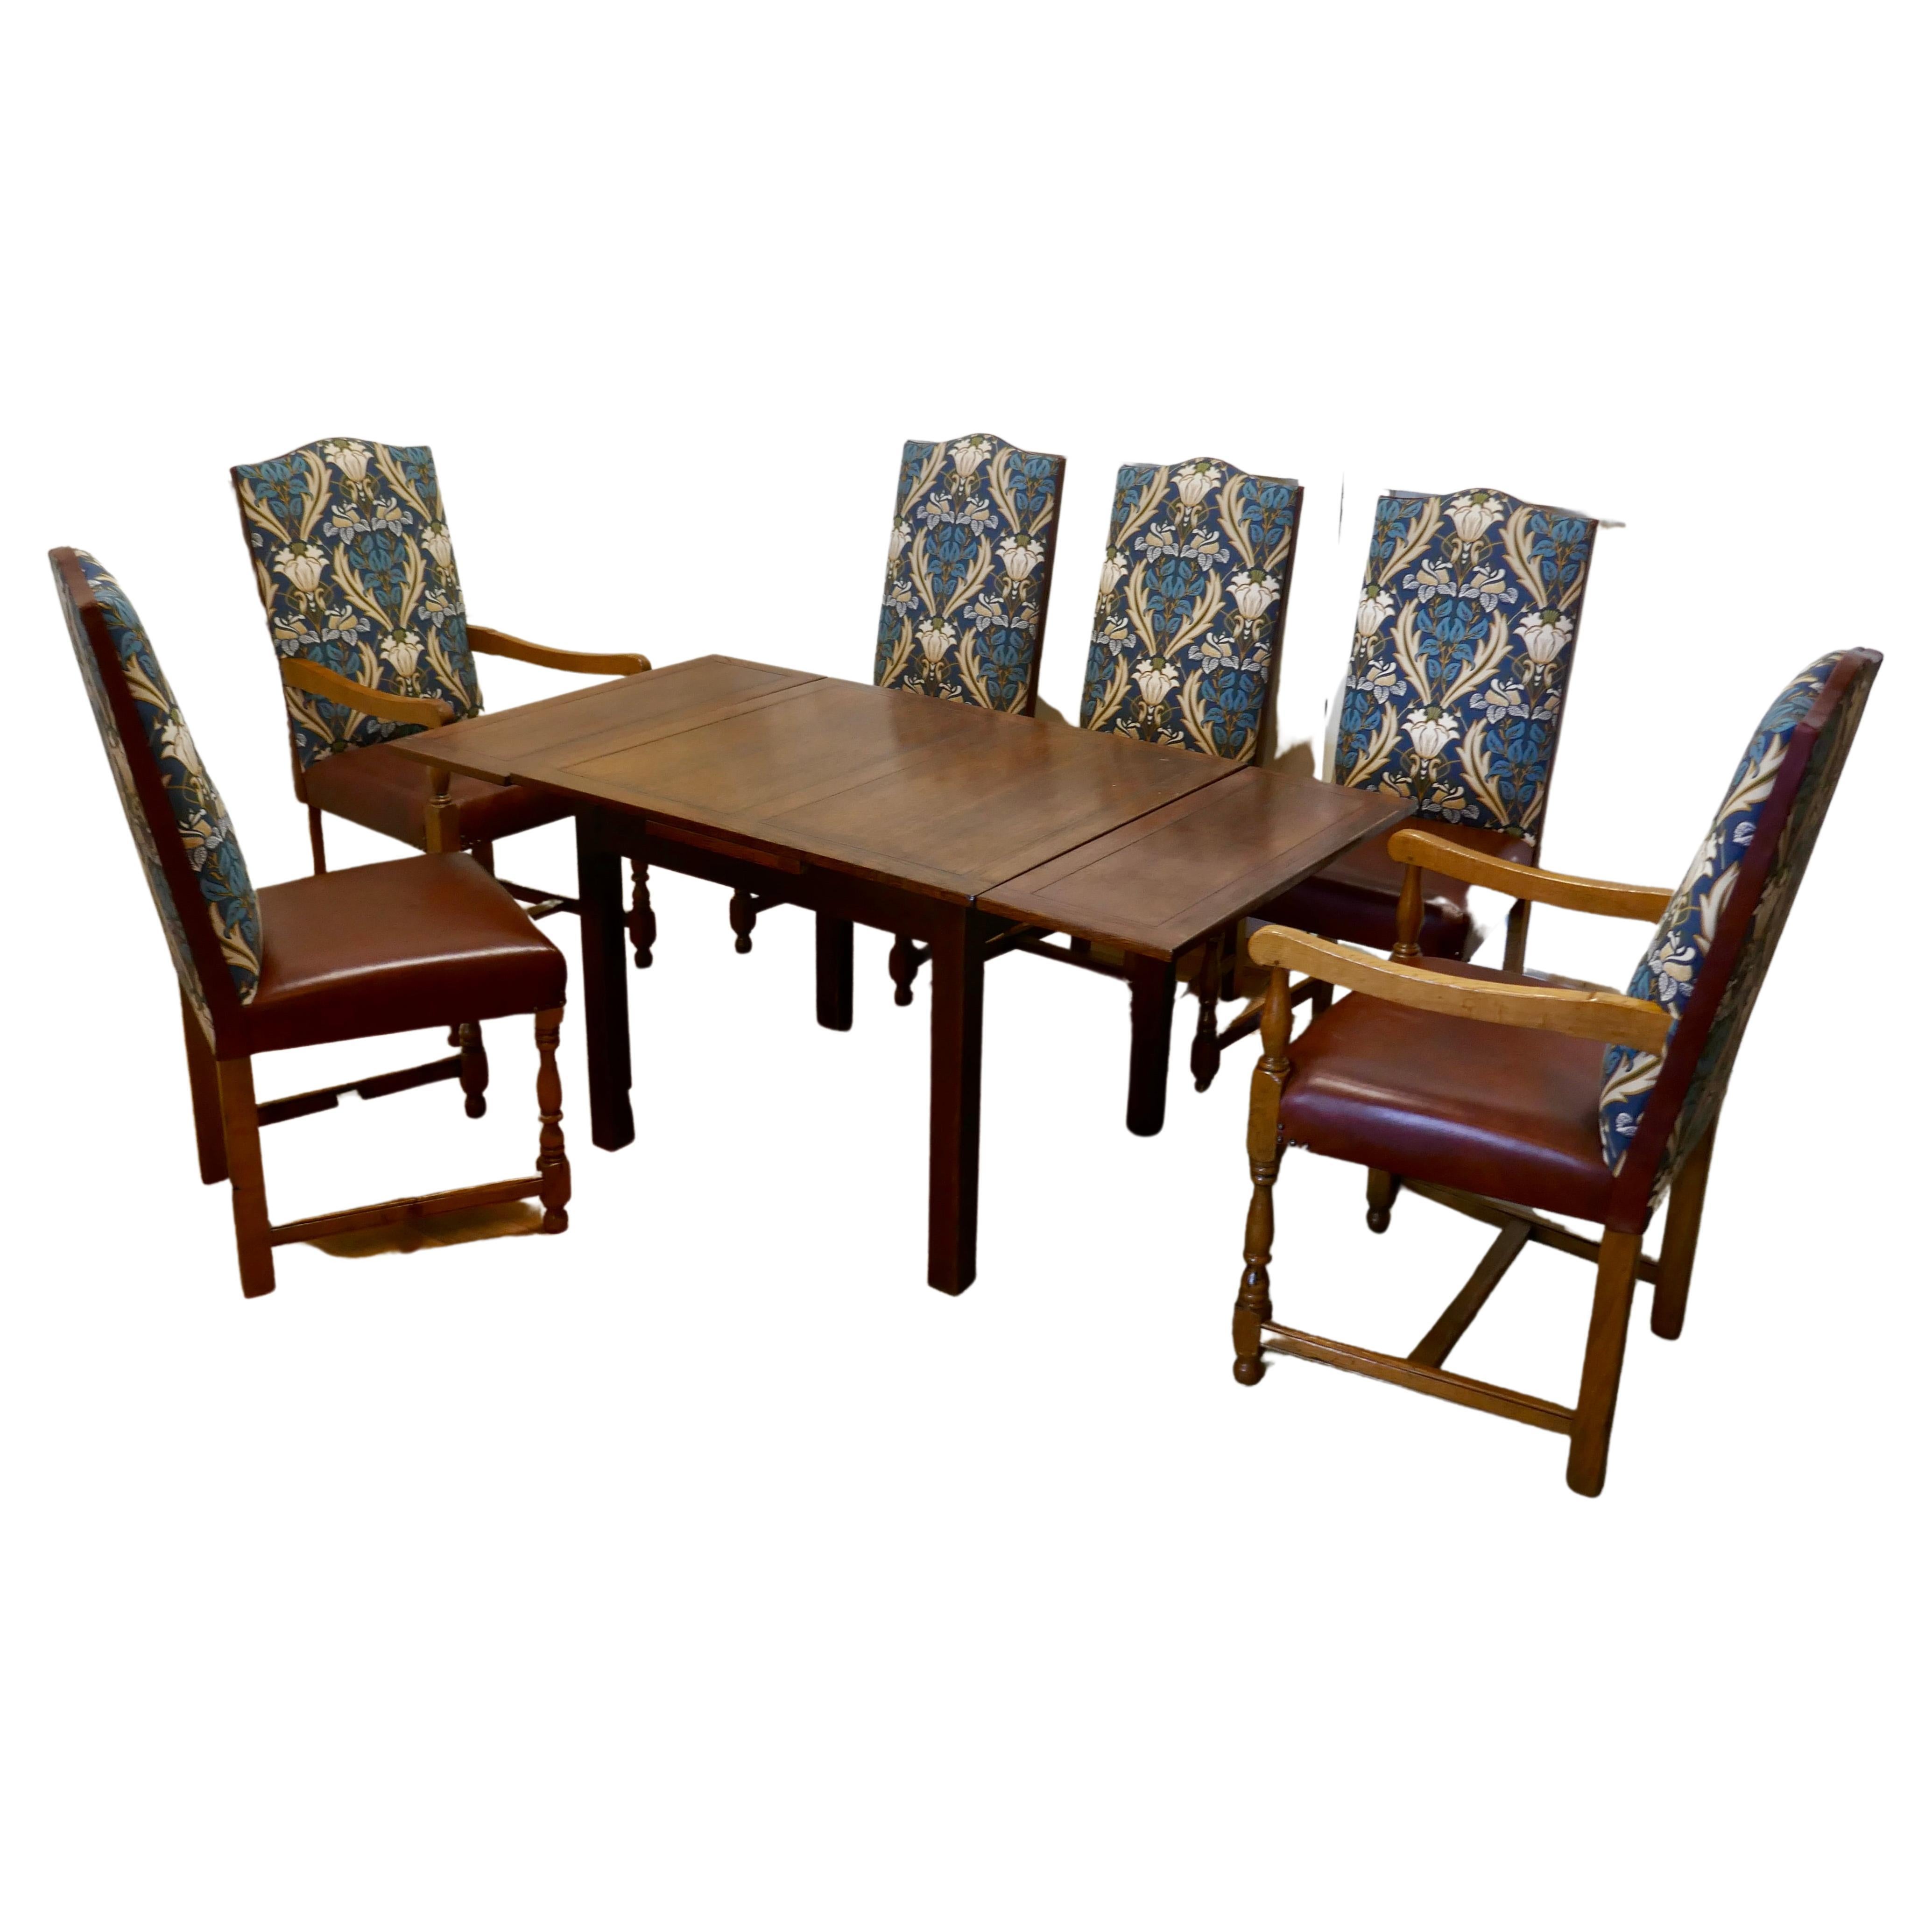 Set of Eight Arts & Crafts Golden Oak Dining Chairs